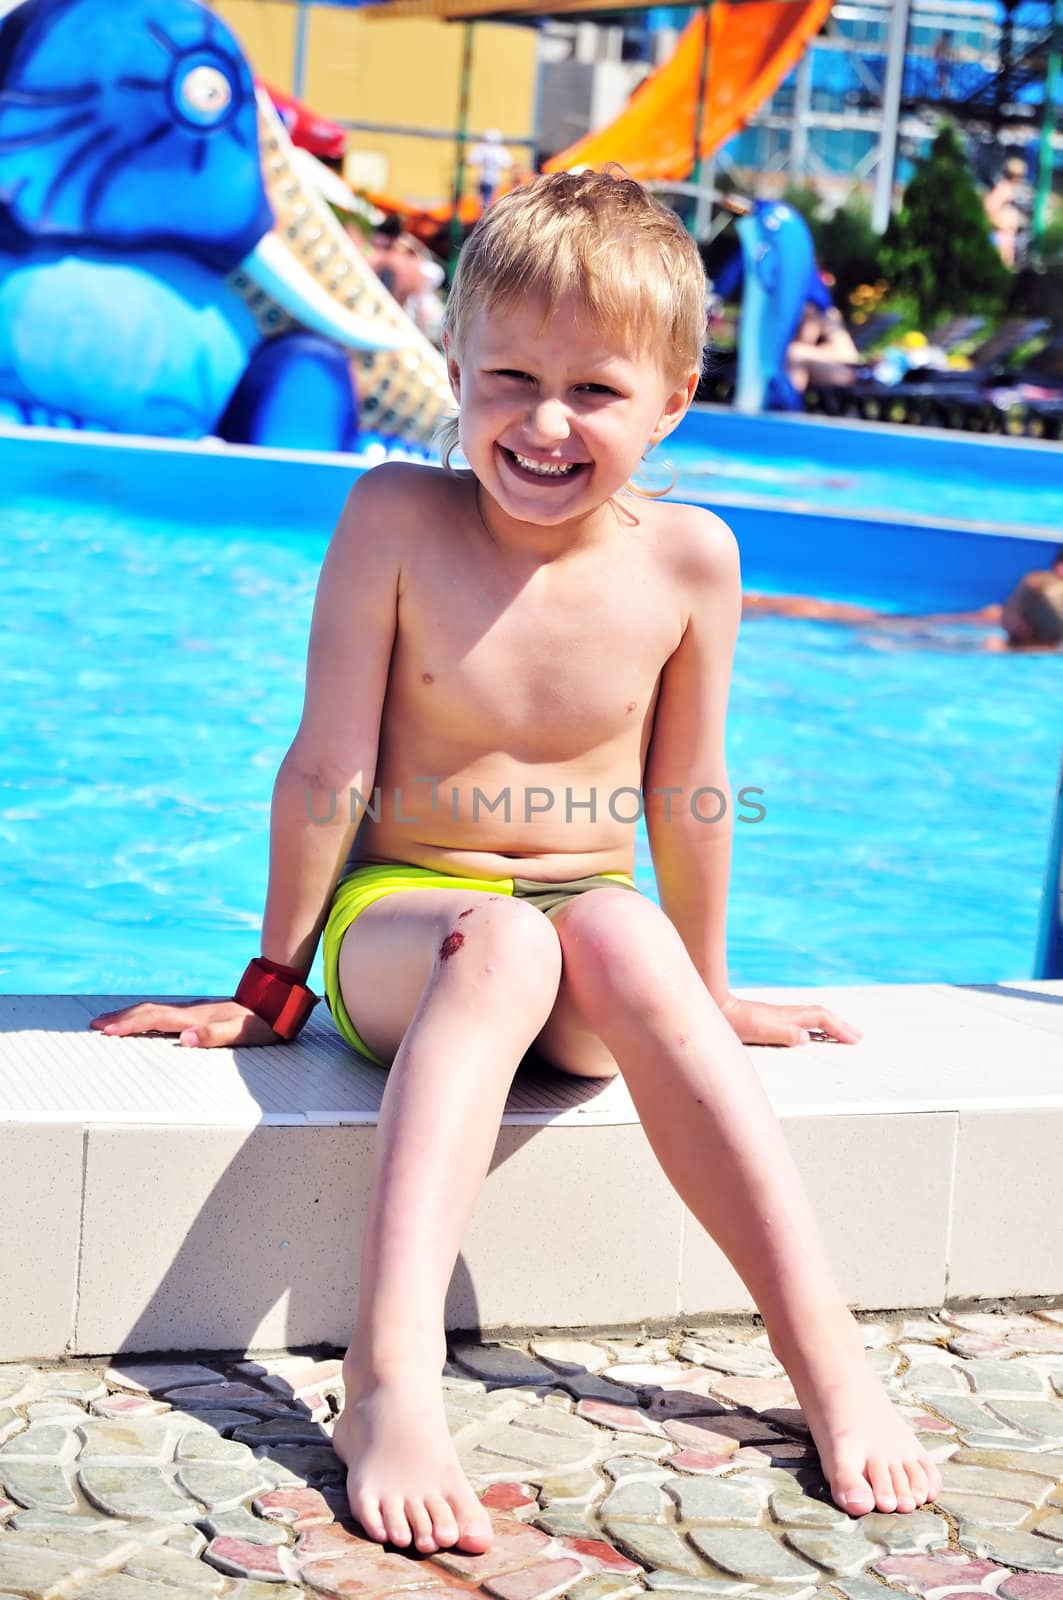 boy wearing swimming trunks is sitting close to swimming pool. summer. sunny day, boy is happy, but his kneel is already  wounded, but he is boy, so it is not unusual